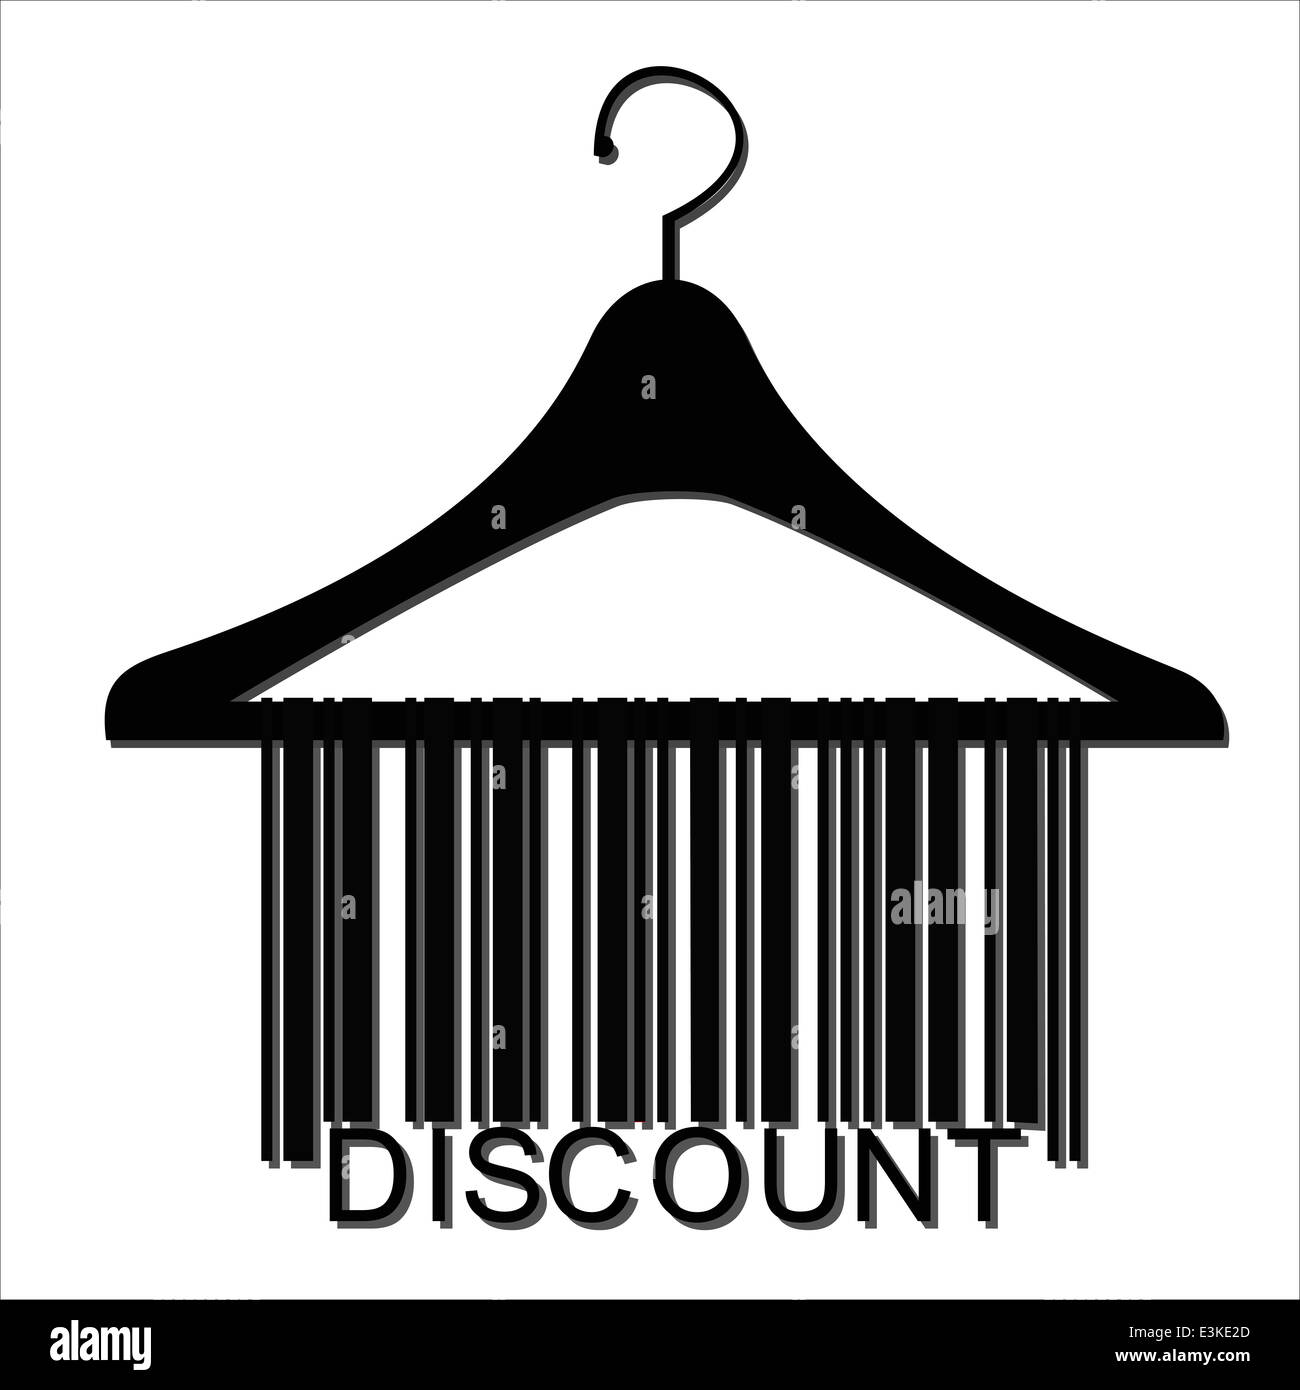 Discount barcode Stock Photo